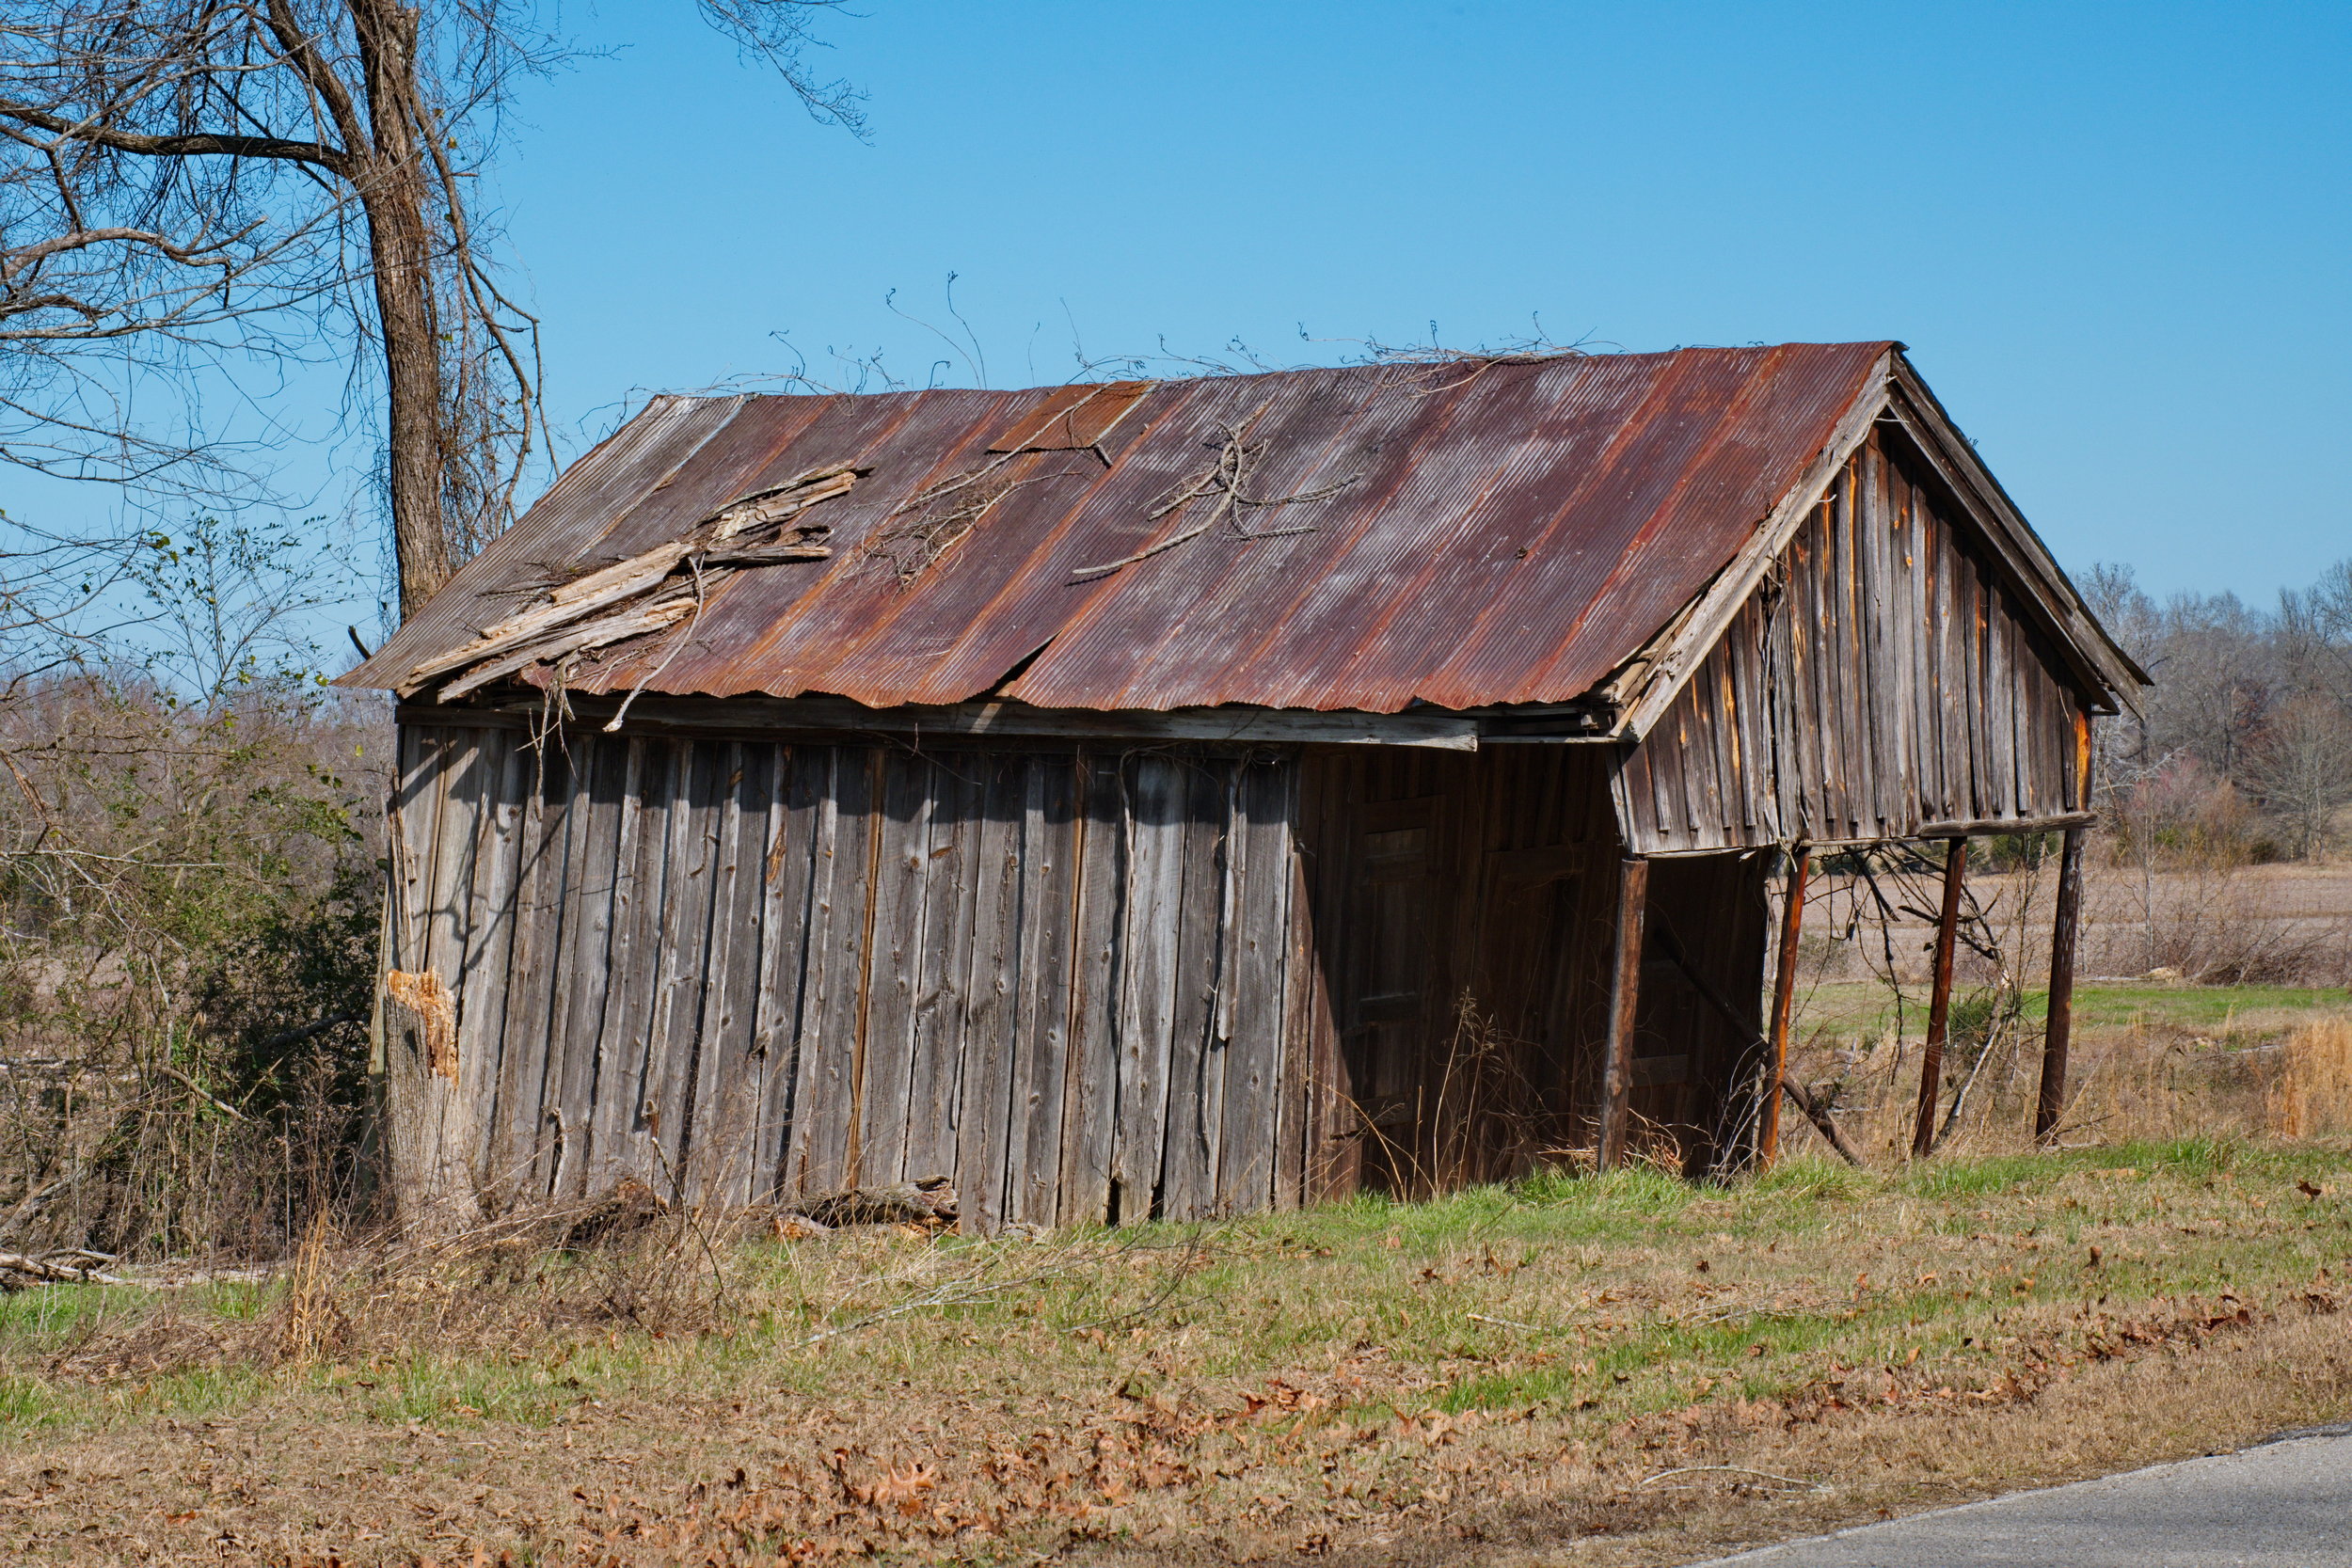  I'm always attracted to old farm structures 